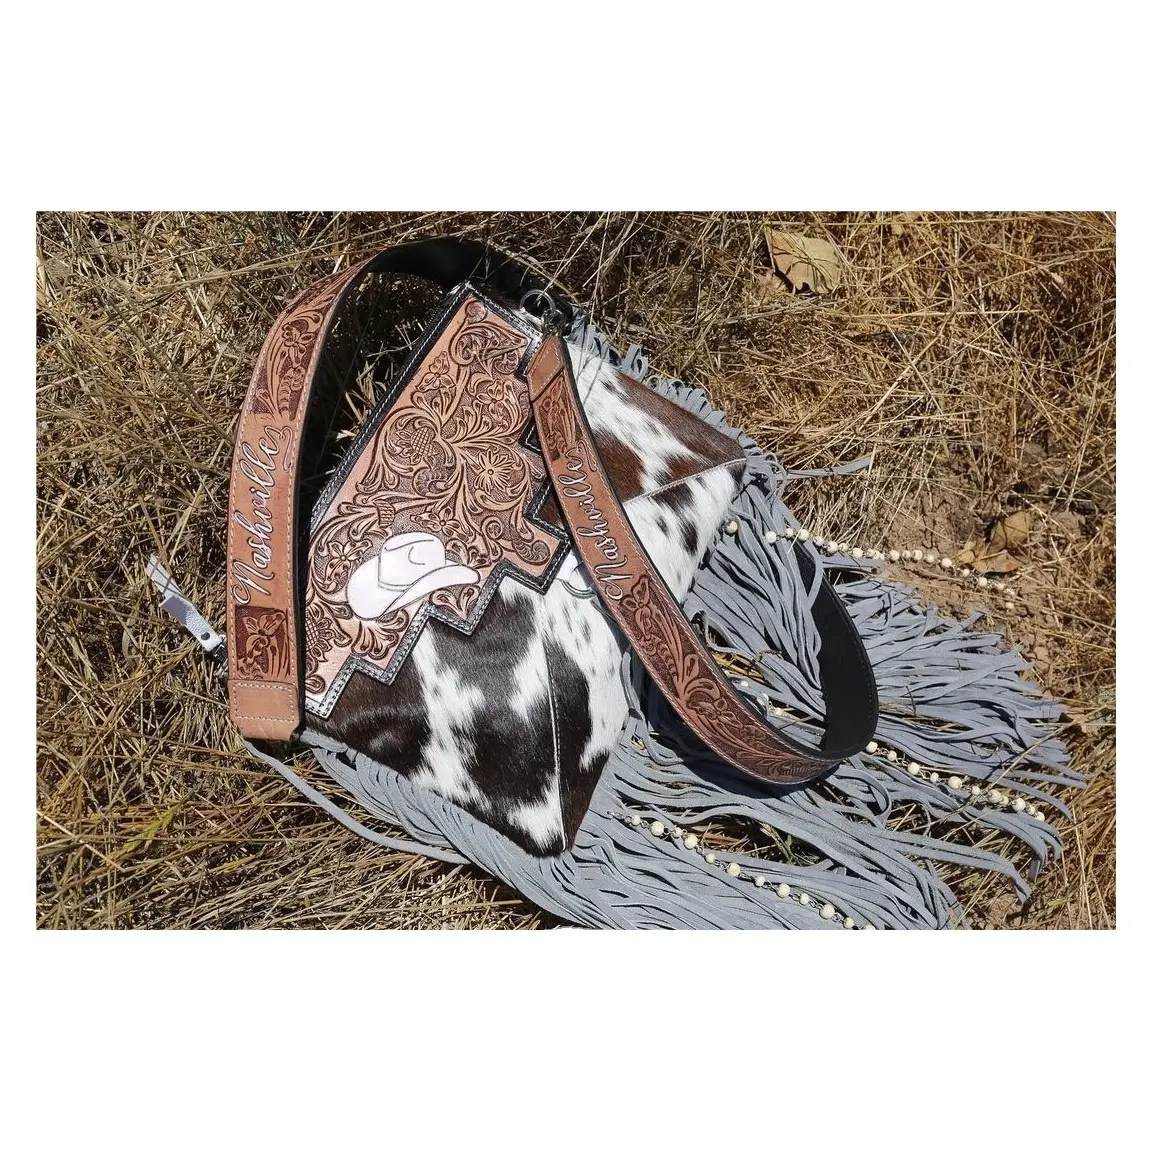 Indian Luxurious Western Cowhide Hair On Women's Luxury Sling Bag With Hand Tooled Floral & Solitaire Design Ready To Stock Bags